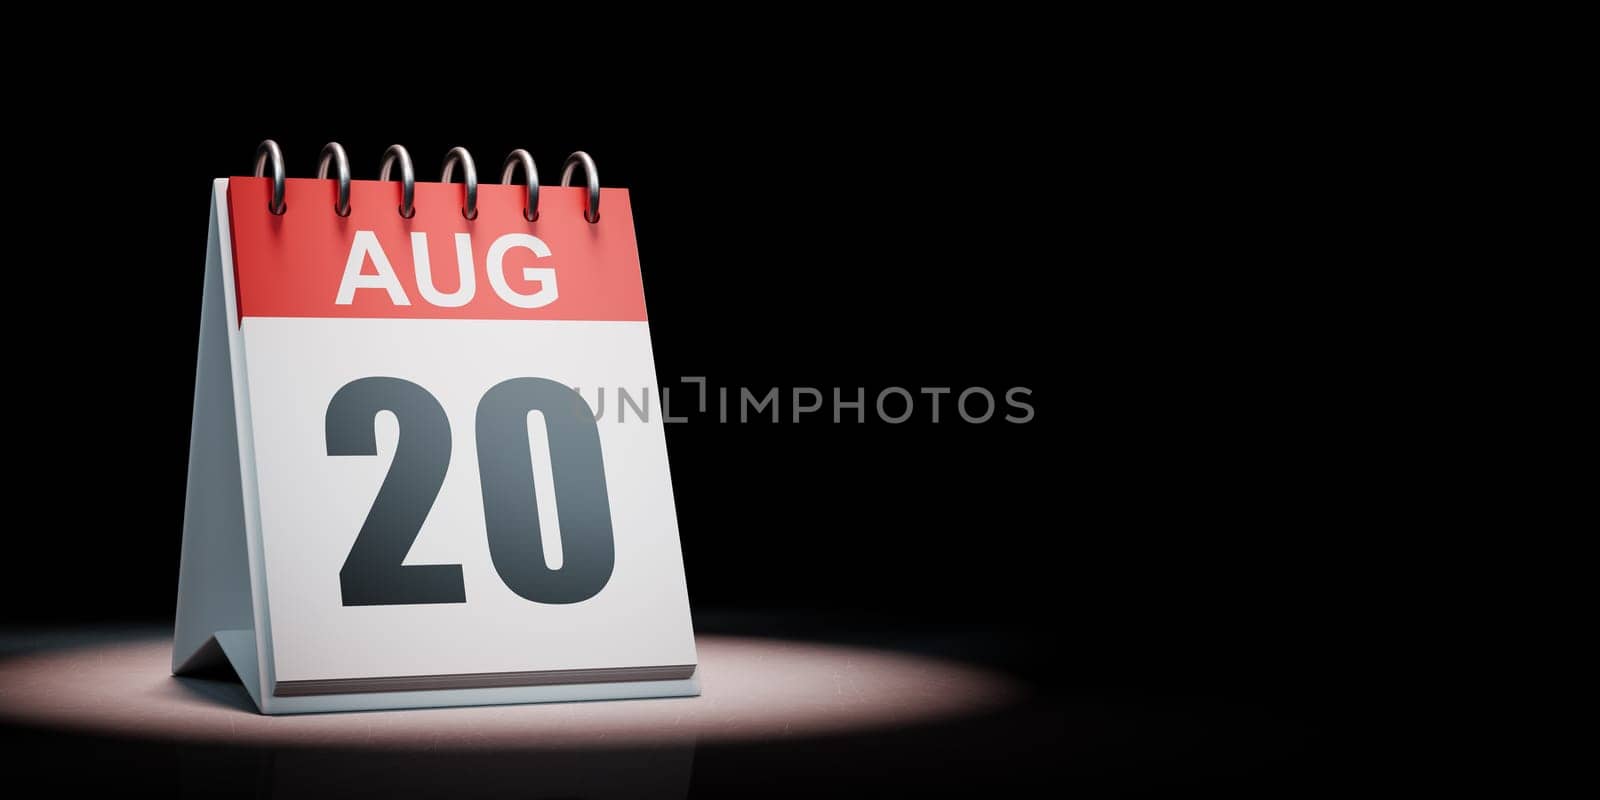 Red and White August 20 Desk Calendar Spotlighted on Black Background with Copy Space 3D Illustration